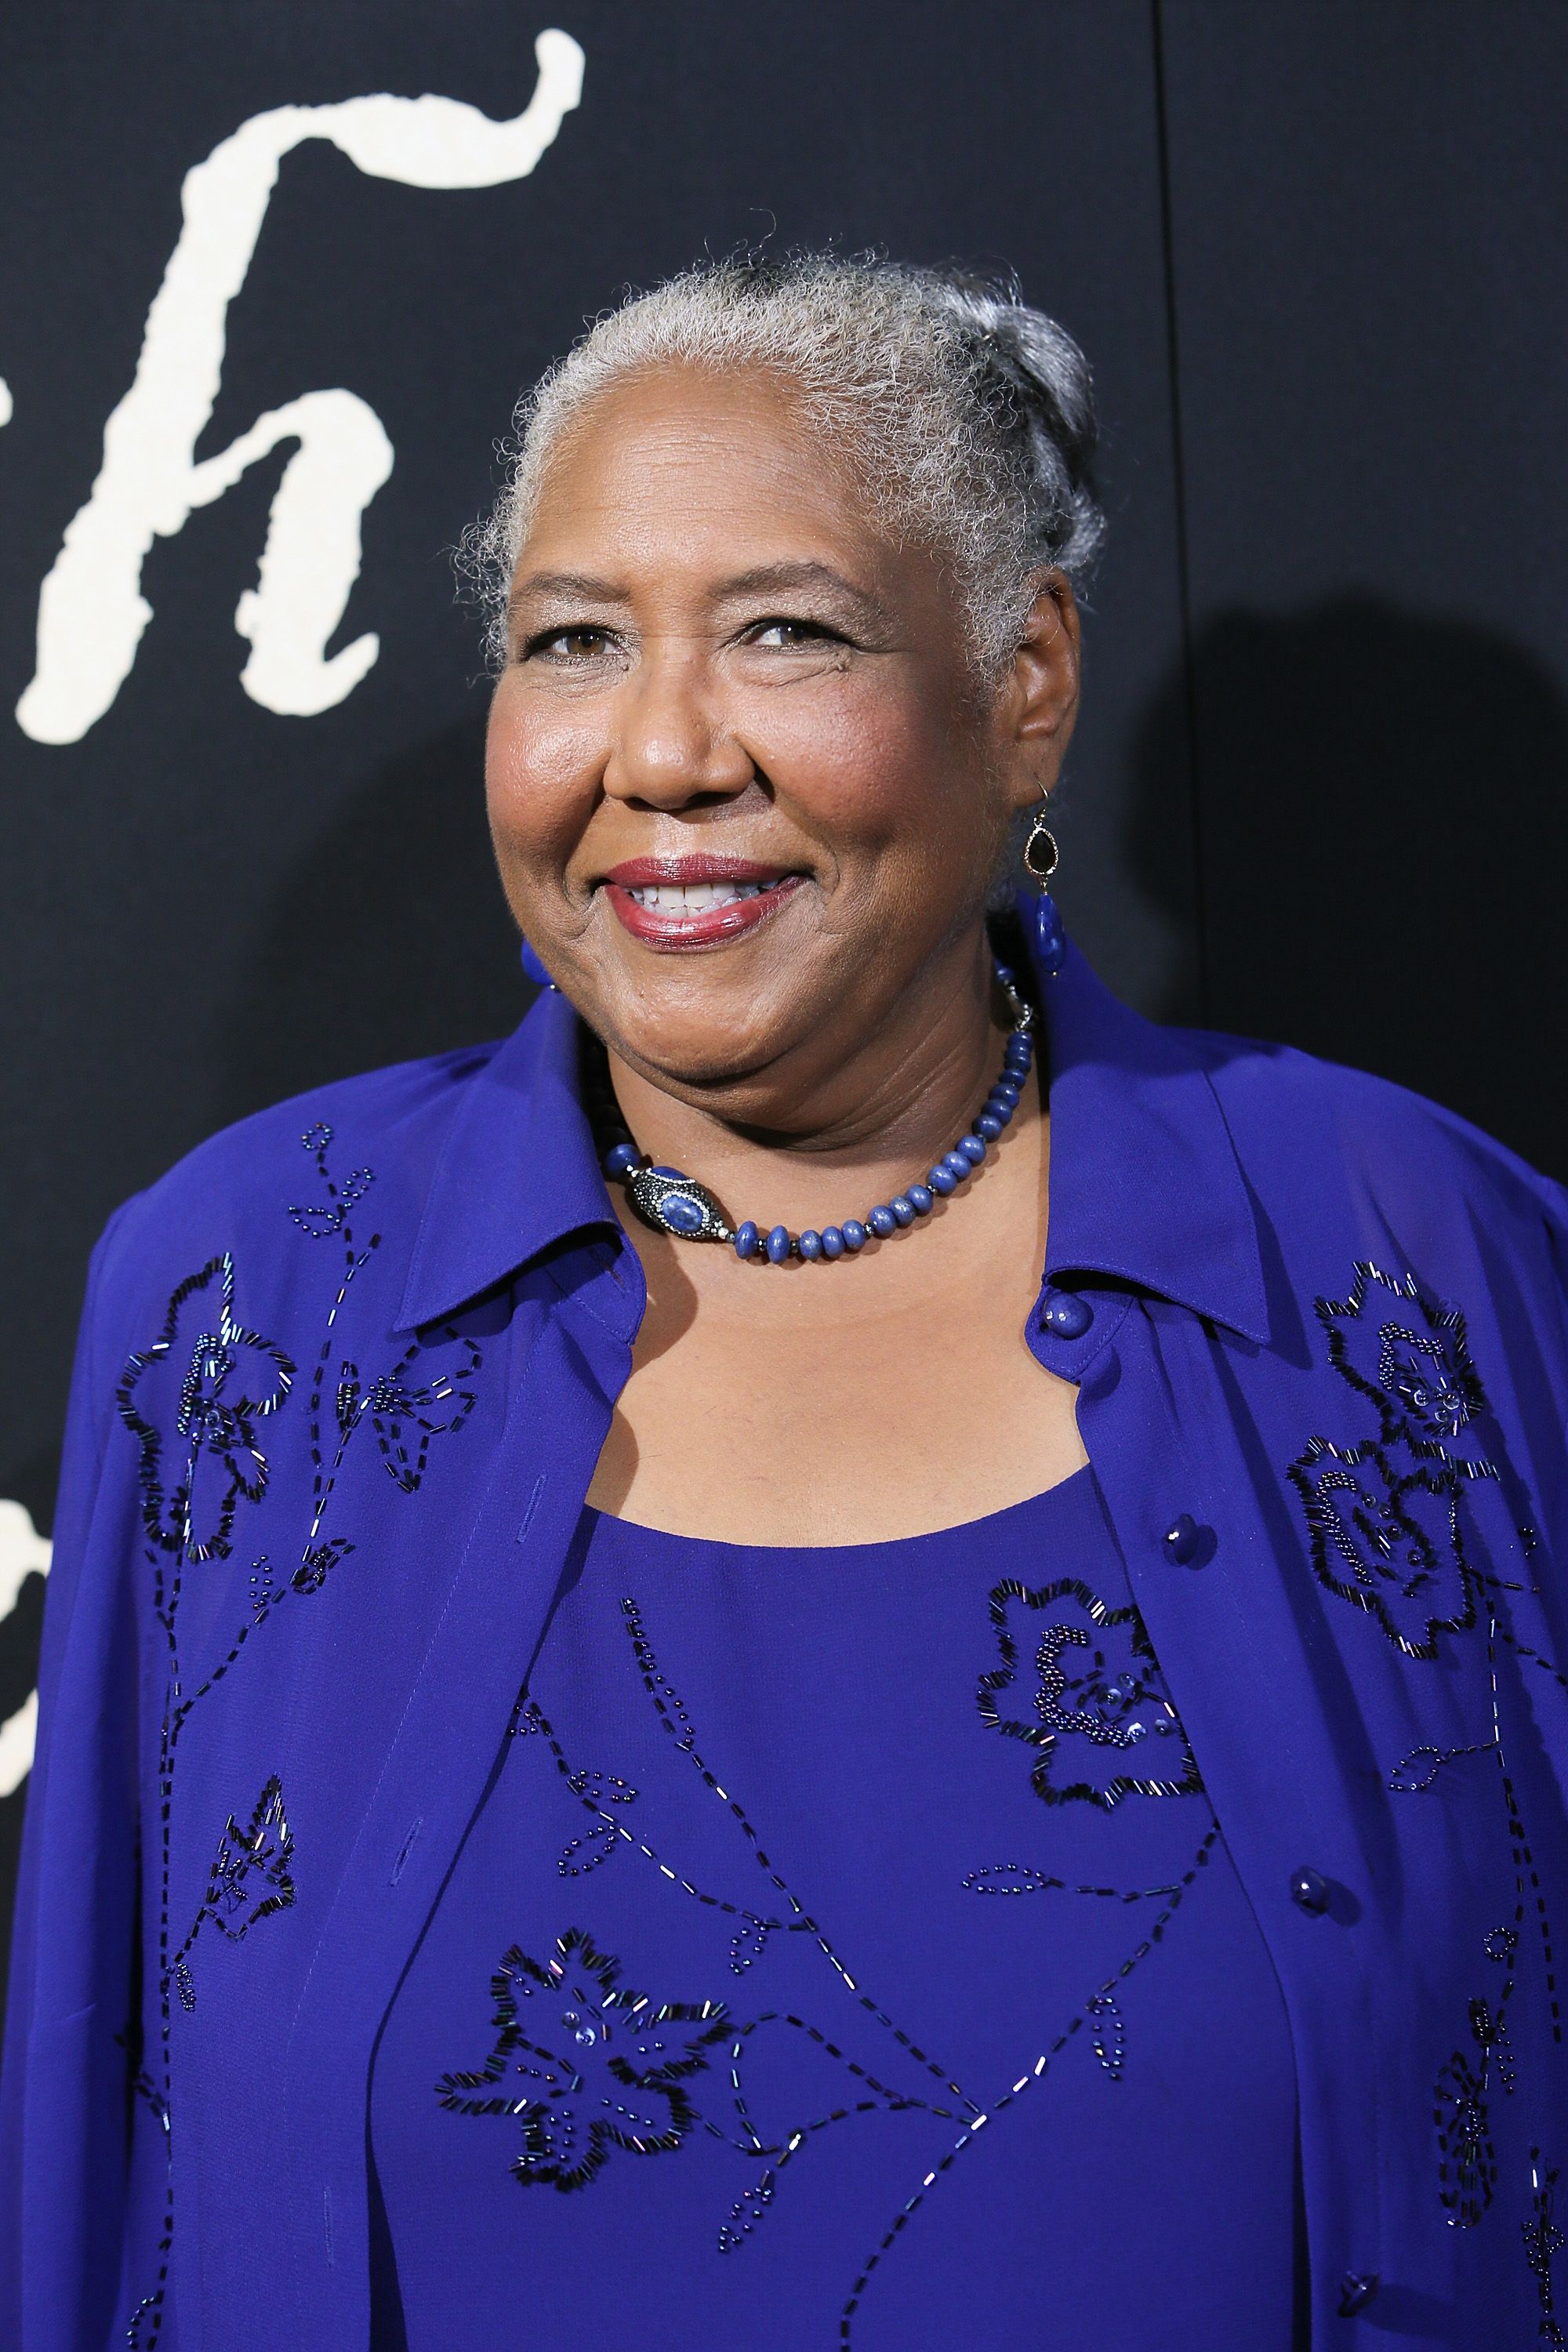 Esther Scott at the premiere of "The Birth Of A Nation" at the ArcLight Cinemas Cinerama Dome on September 21, 2016, in Hollywood, California | Photo: David Livingston/Getty Images